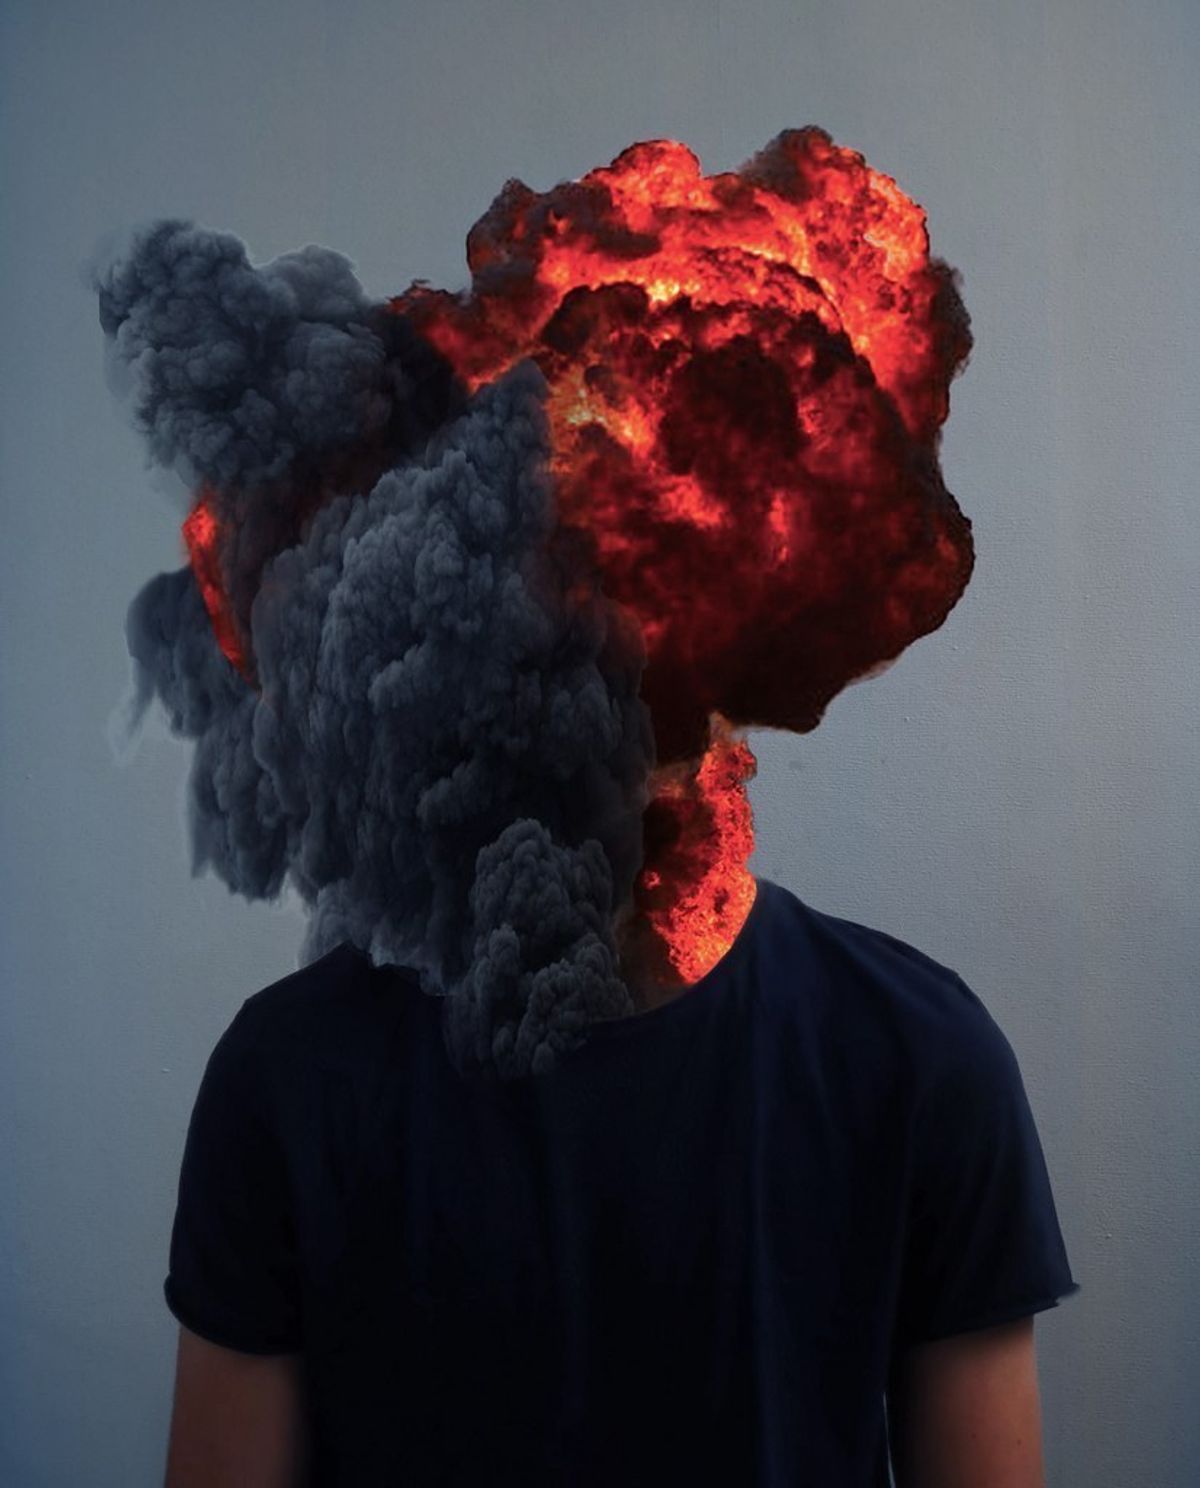 12 Signs You Are A Chronic Overthinker